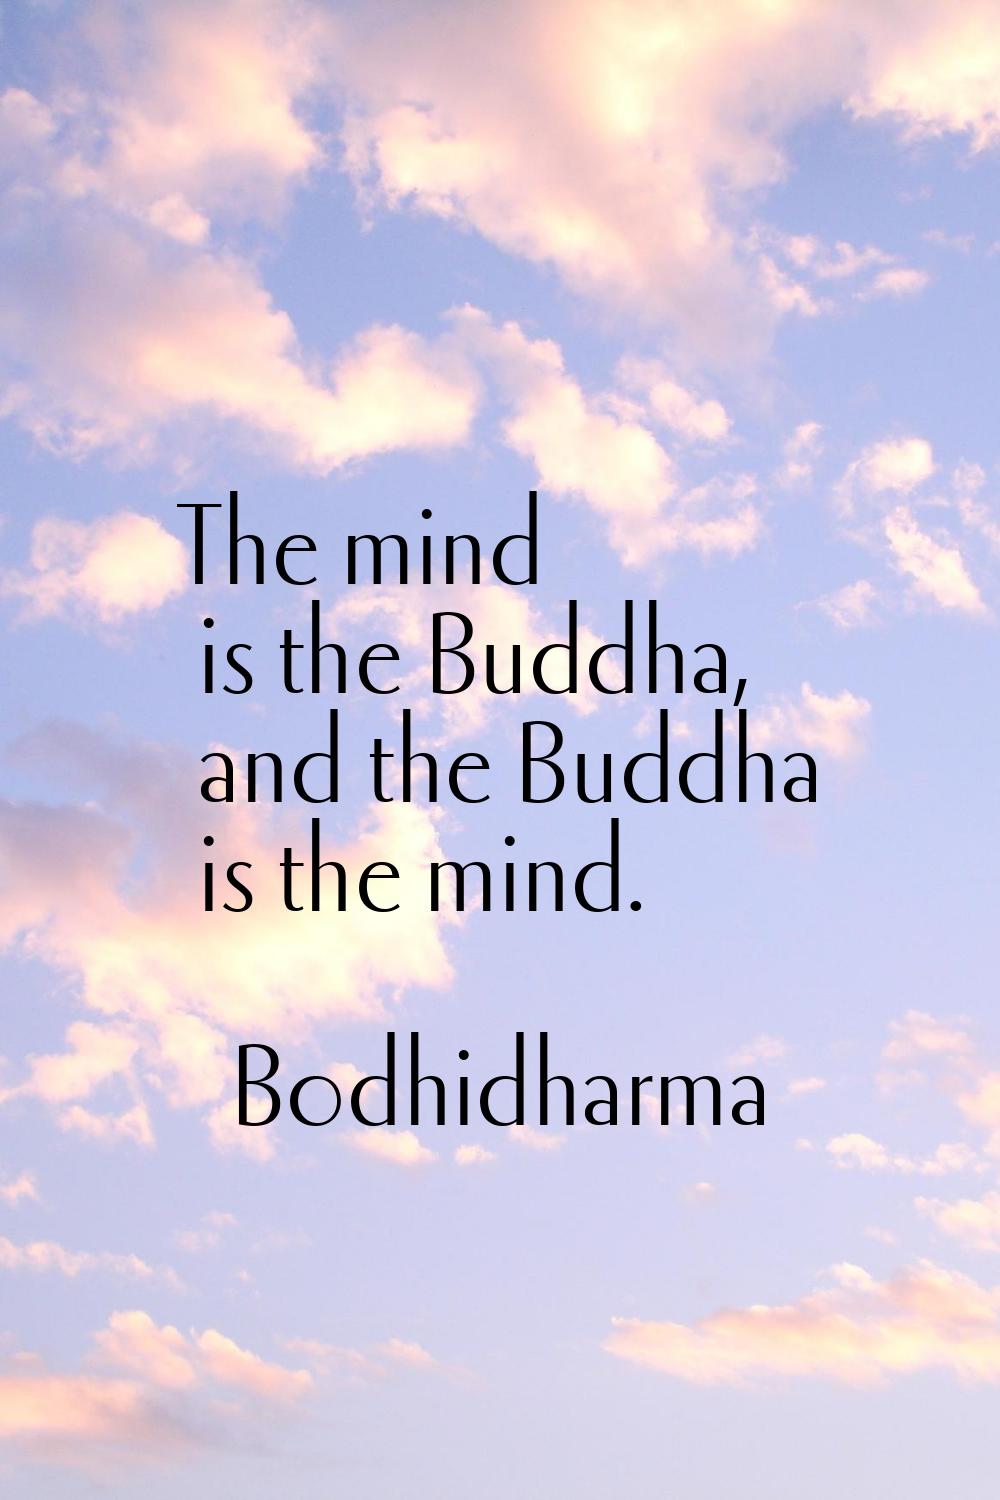 The mind is the Buddha, and the Buddha is the mind.